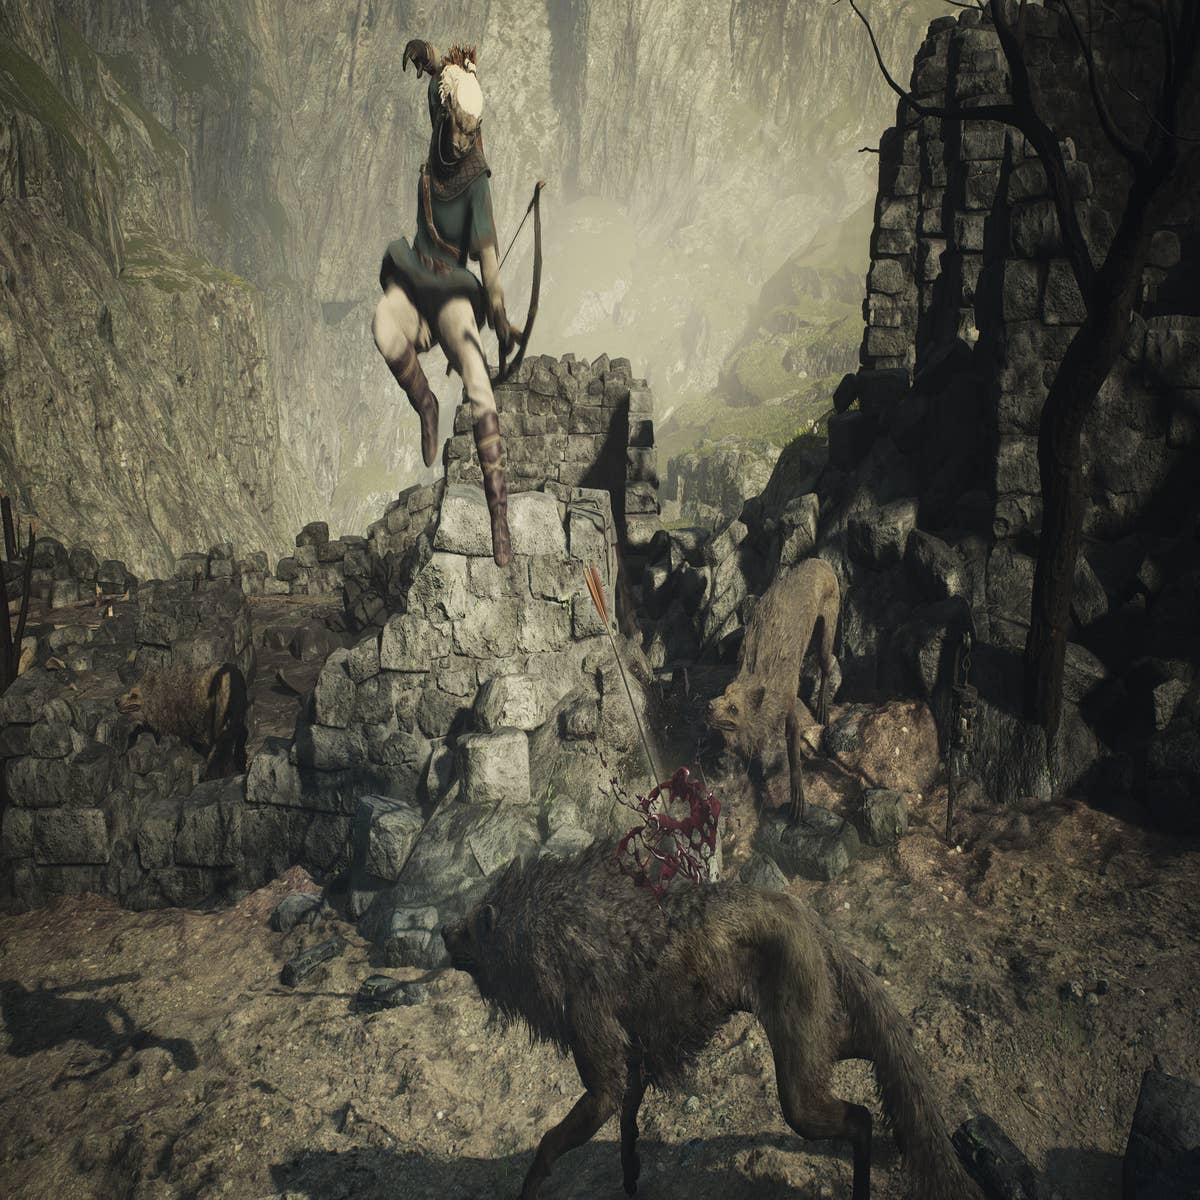 Hands On with Dragon's Dogma 2 @ TGS 2023